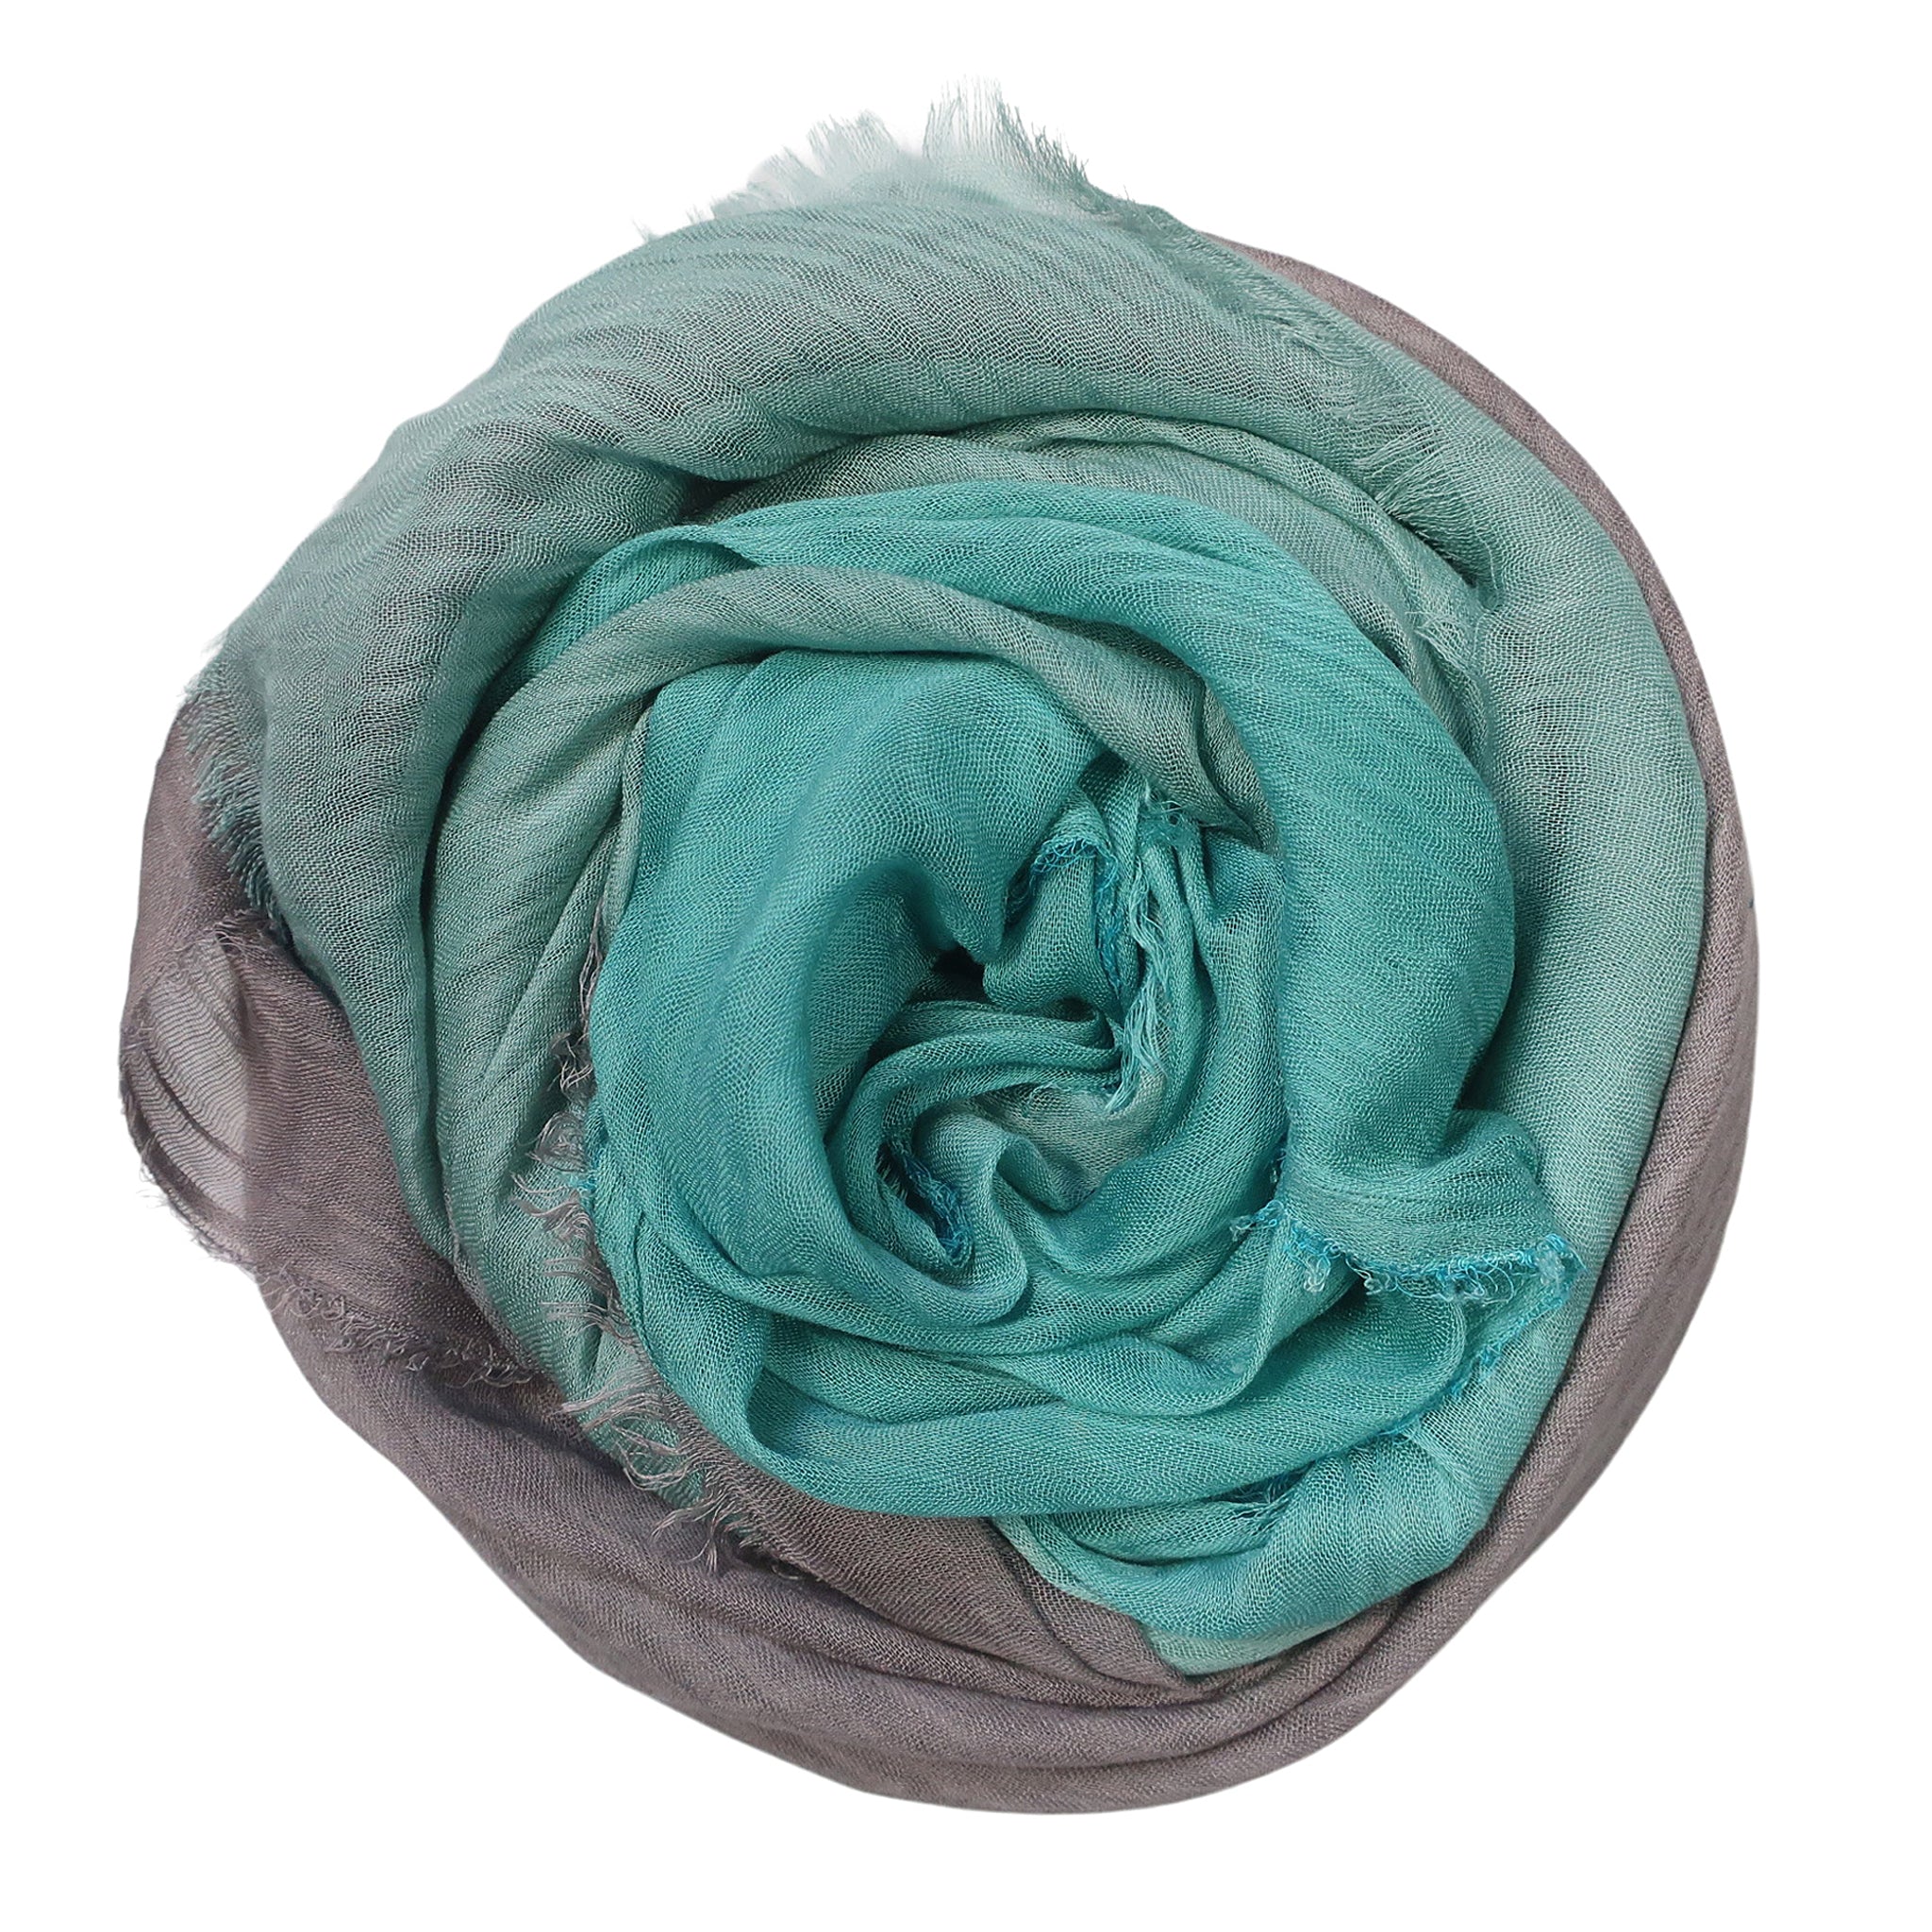 Blue Pacific Dream Cashmere and Silk Scarf in Aquifer and Taupe 47 x 37